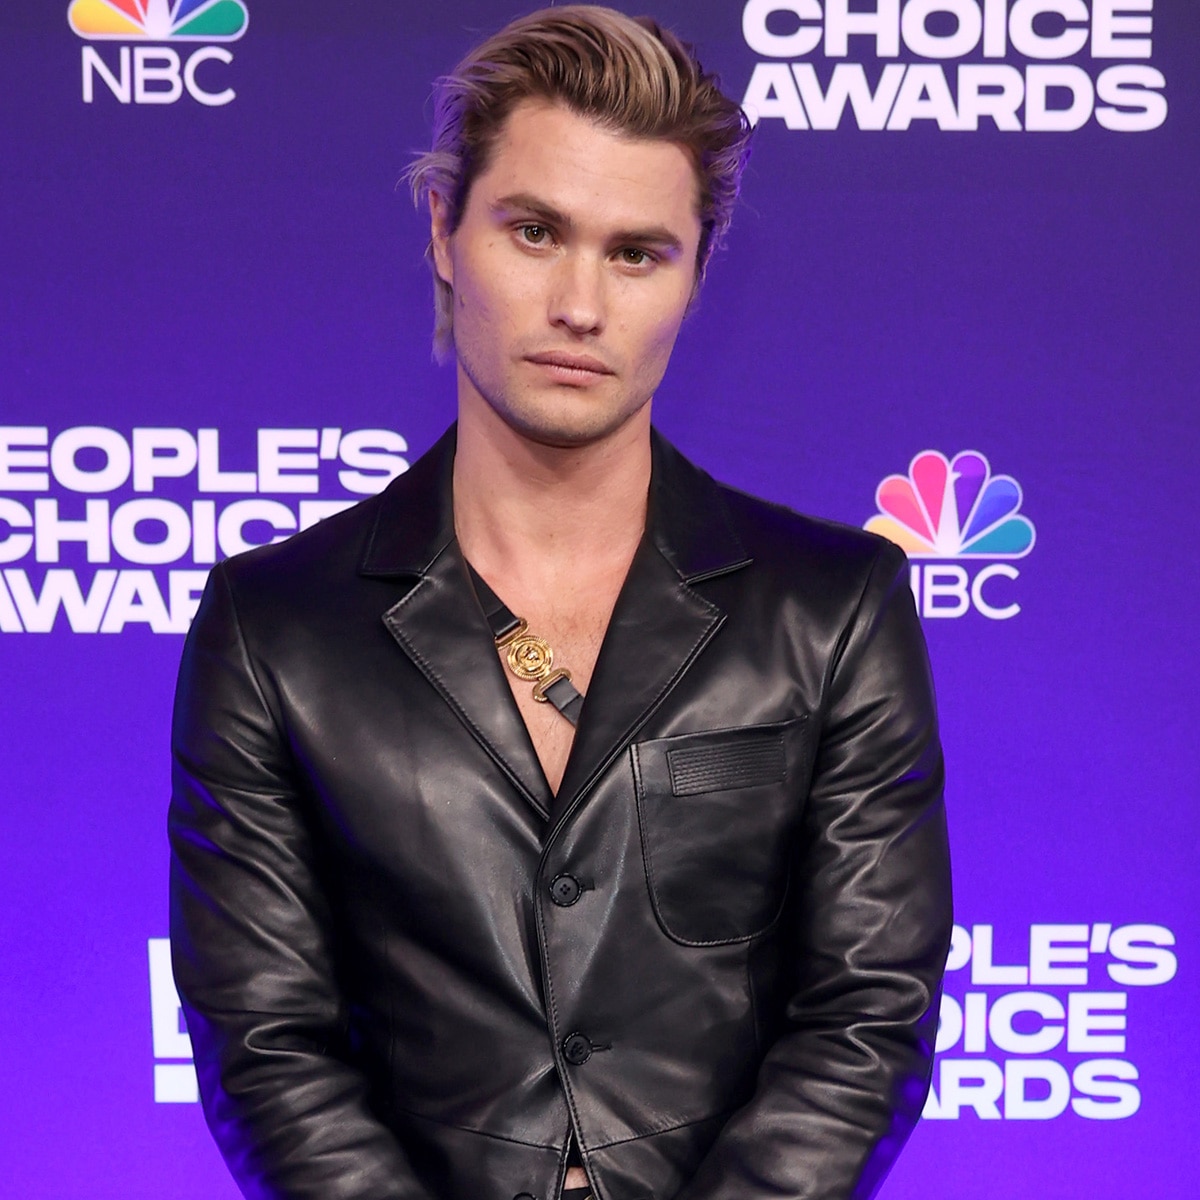 Chase Stokes, 2021 Peoples Choice Awards, Arrivals, Red Carpet Fashion